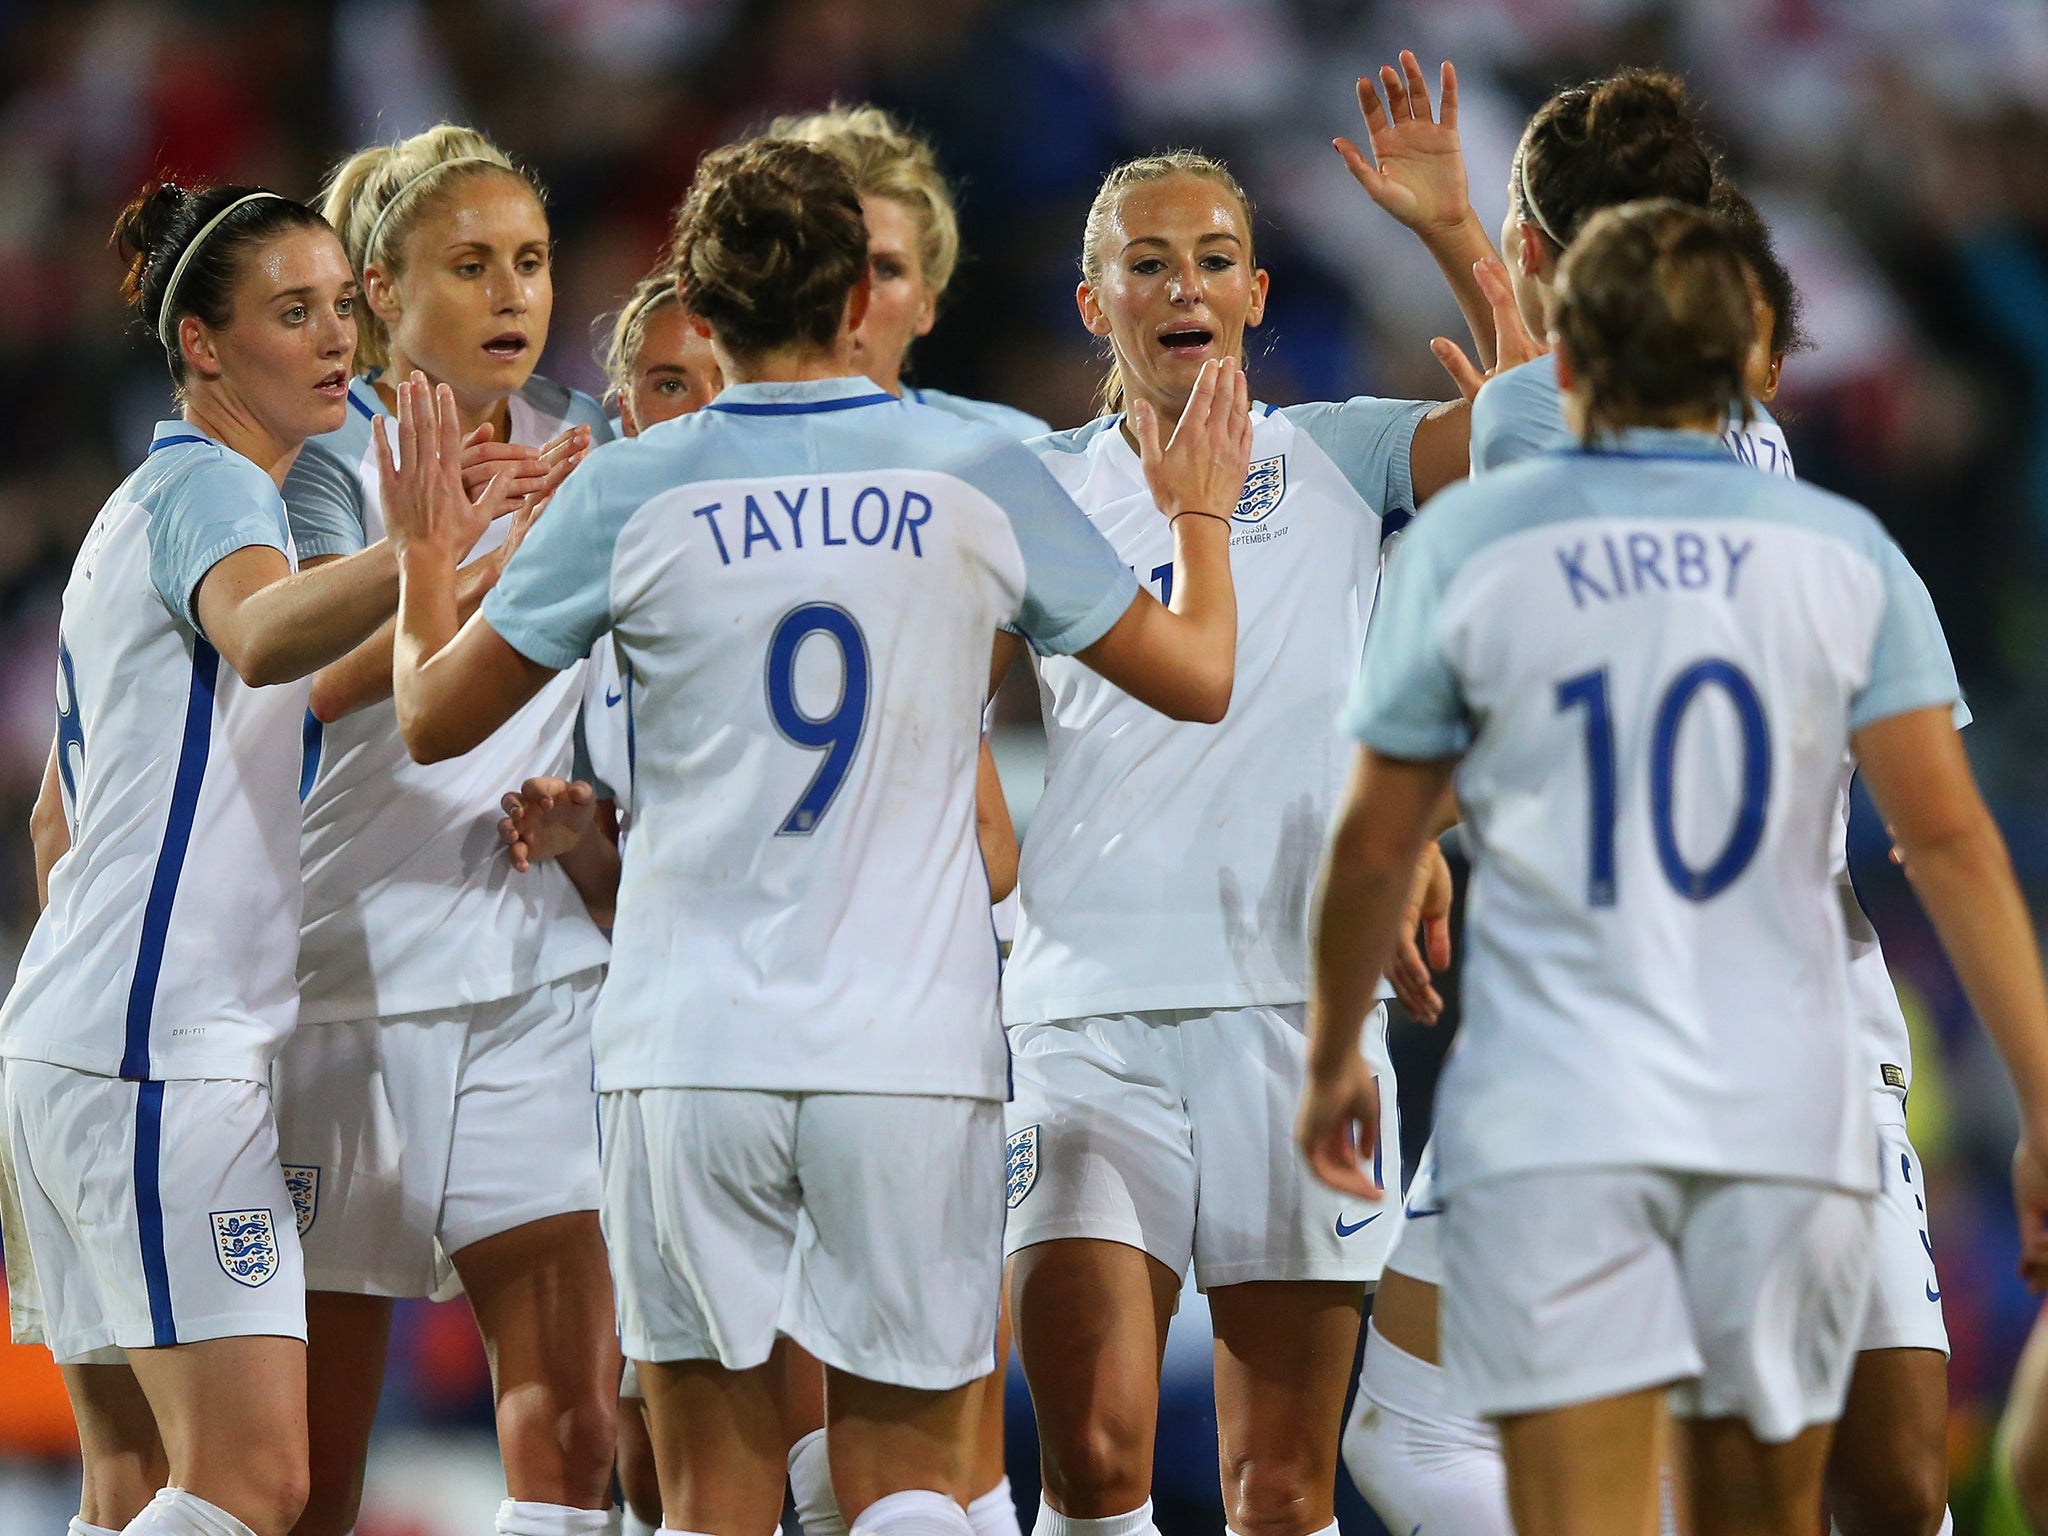 England dropped just two points in their qualifying campaign, winning seven and drawn one of their games